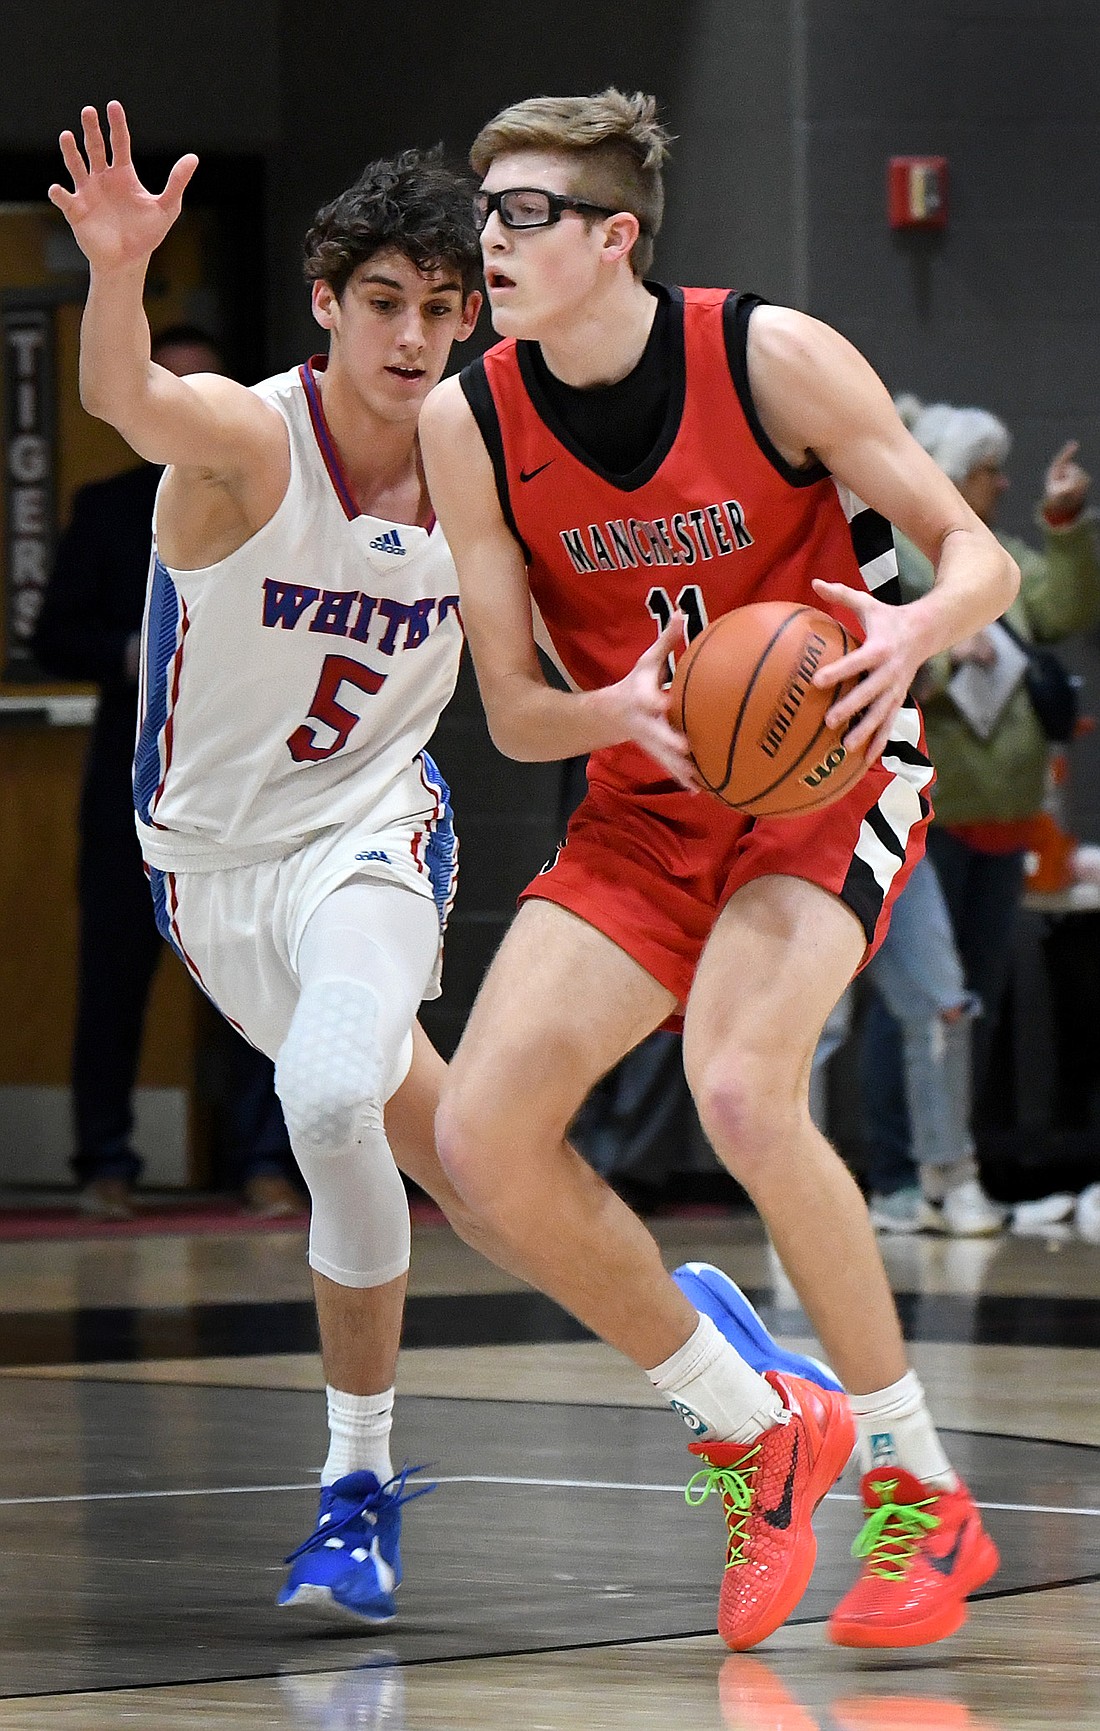 Manchester junior and 2024 Times-Union Boys Basketball Player of the Year Gavin Betten survey’s the court as Whitko’s Sam Essegian defends.